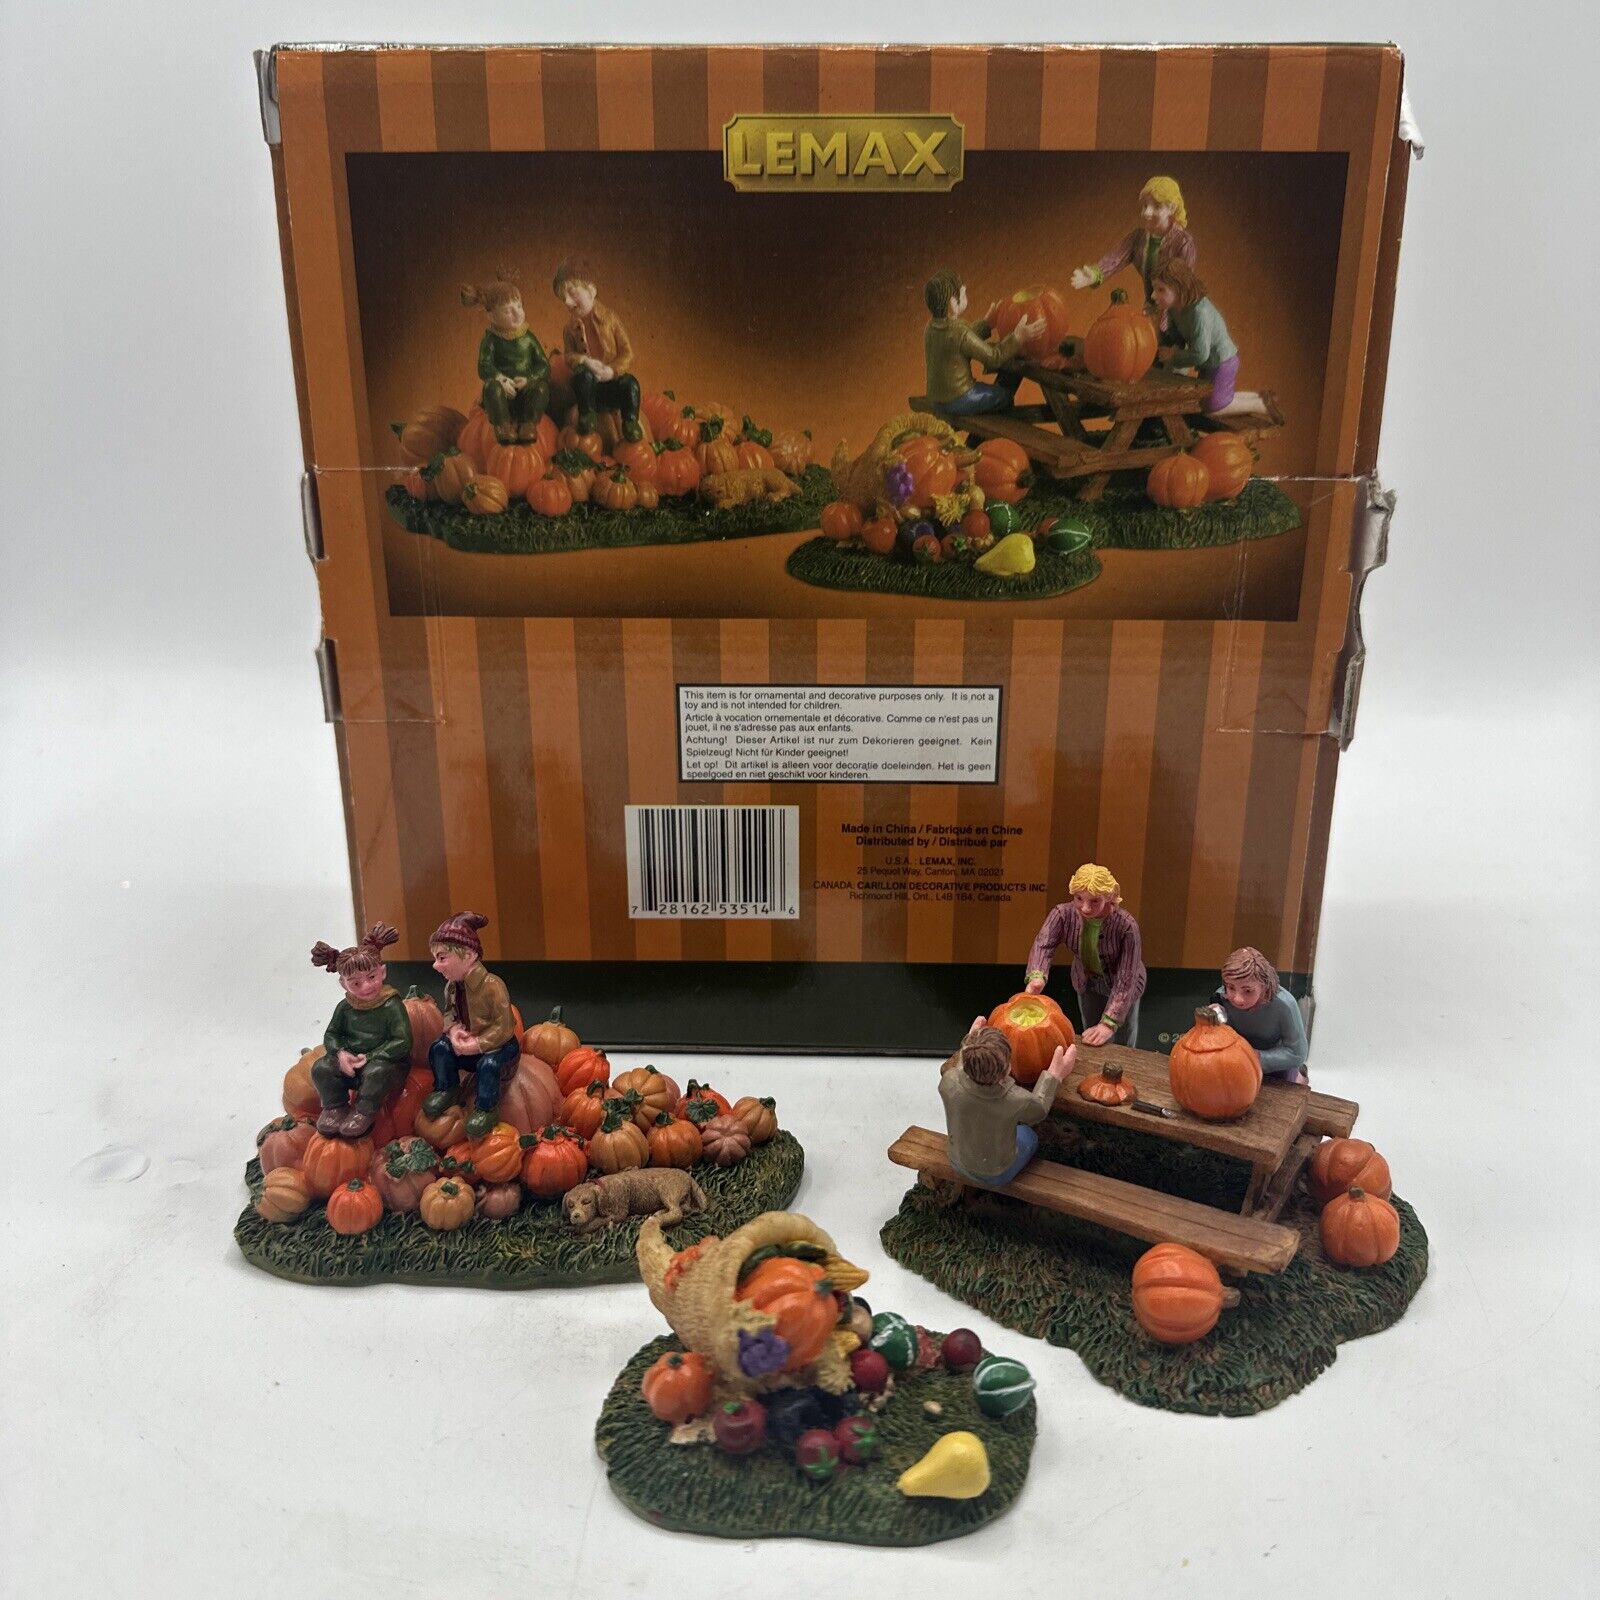 RARE RETIRED LEMAX HARVEST DELIGHT  #53514 CARVING PUMPKINS FALL AUTUMN Repaired